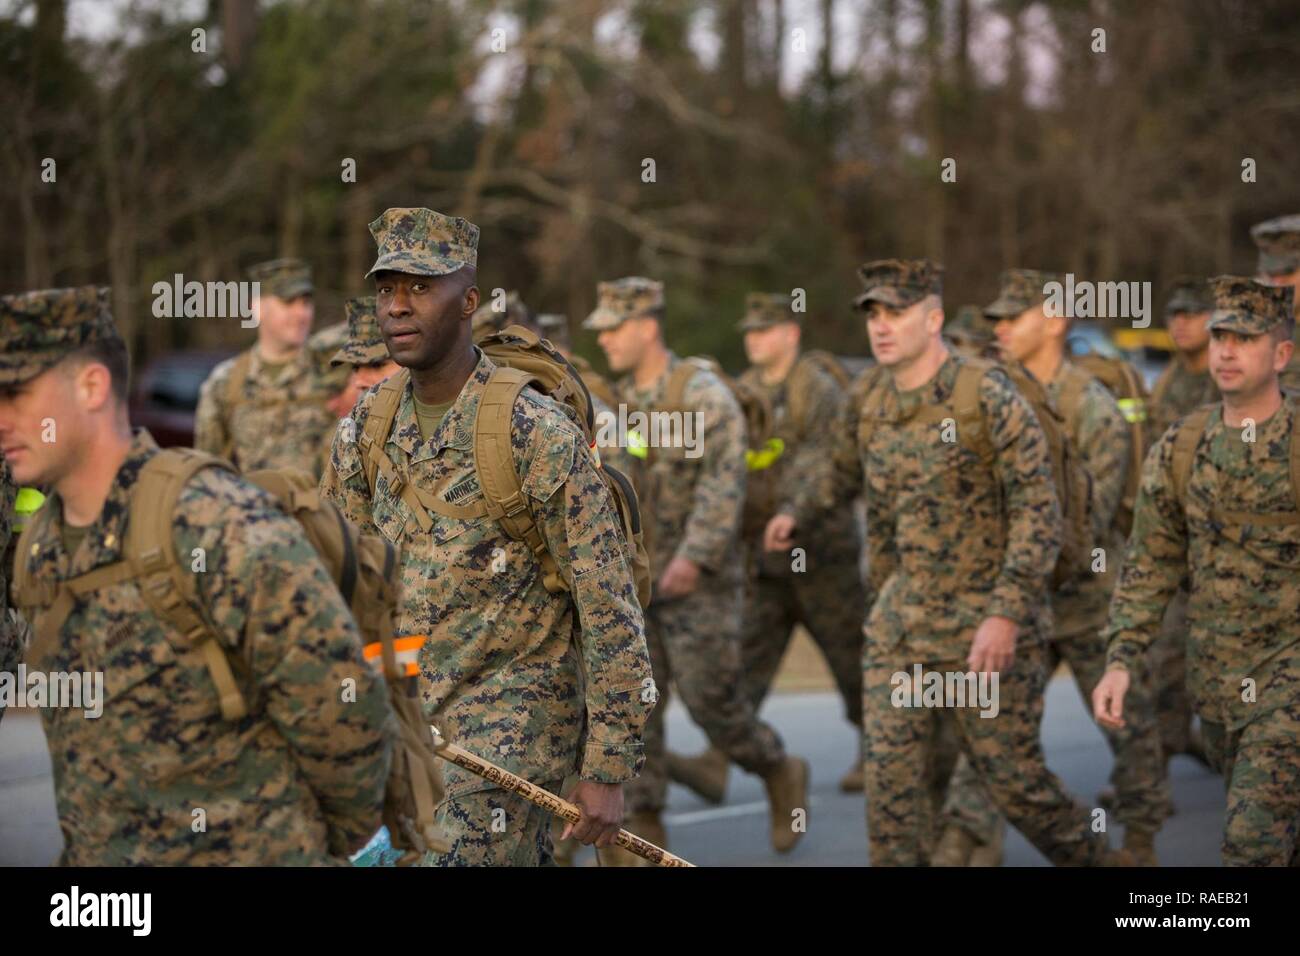 U.S. Marine Corps Master Sgt. Kevin E. Brown, center, equal opportunity advisor, II Marine Expeditionary Force, participates in the 2nd Marine Division (2d MARDIV) 50-mile challenge hike on Camp Lejeune, N.C., Feb. 1, 2017. The hike was held to challenge Marines of 2d MARDIV as well as test their skill and will. Stock Photo